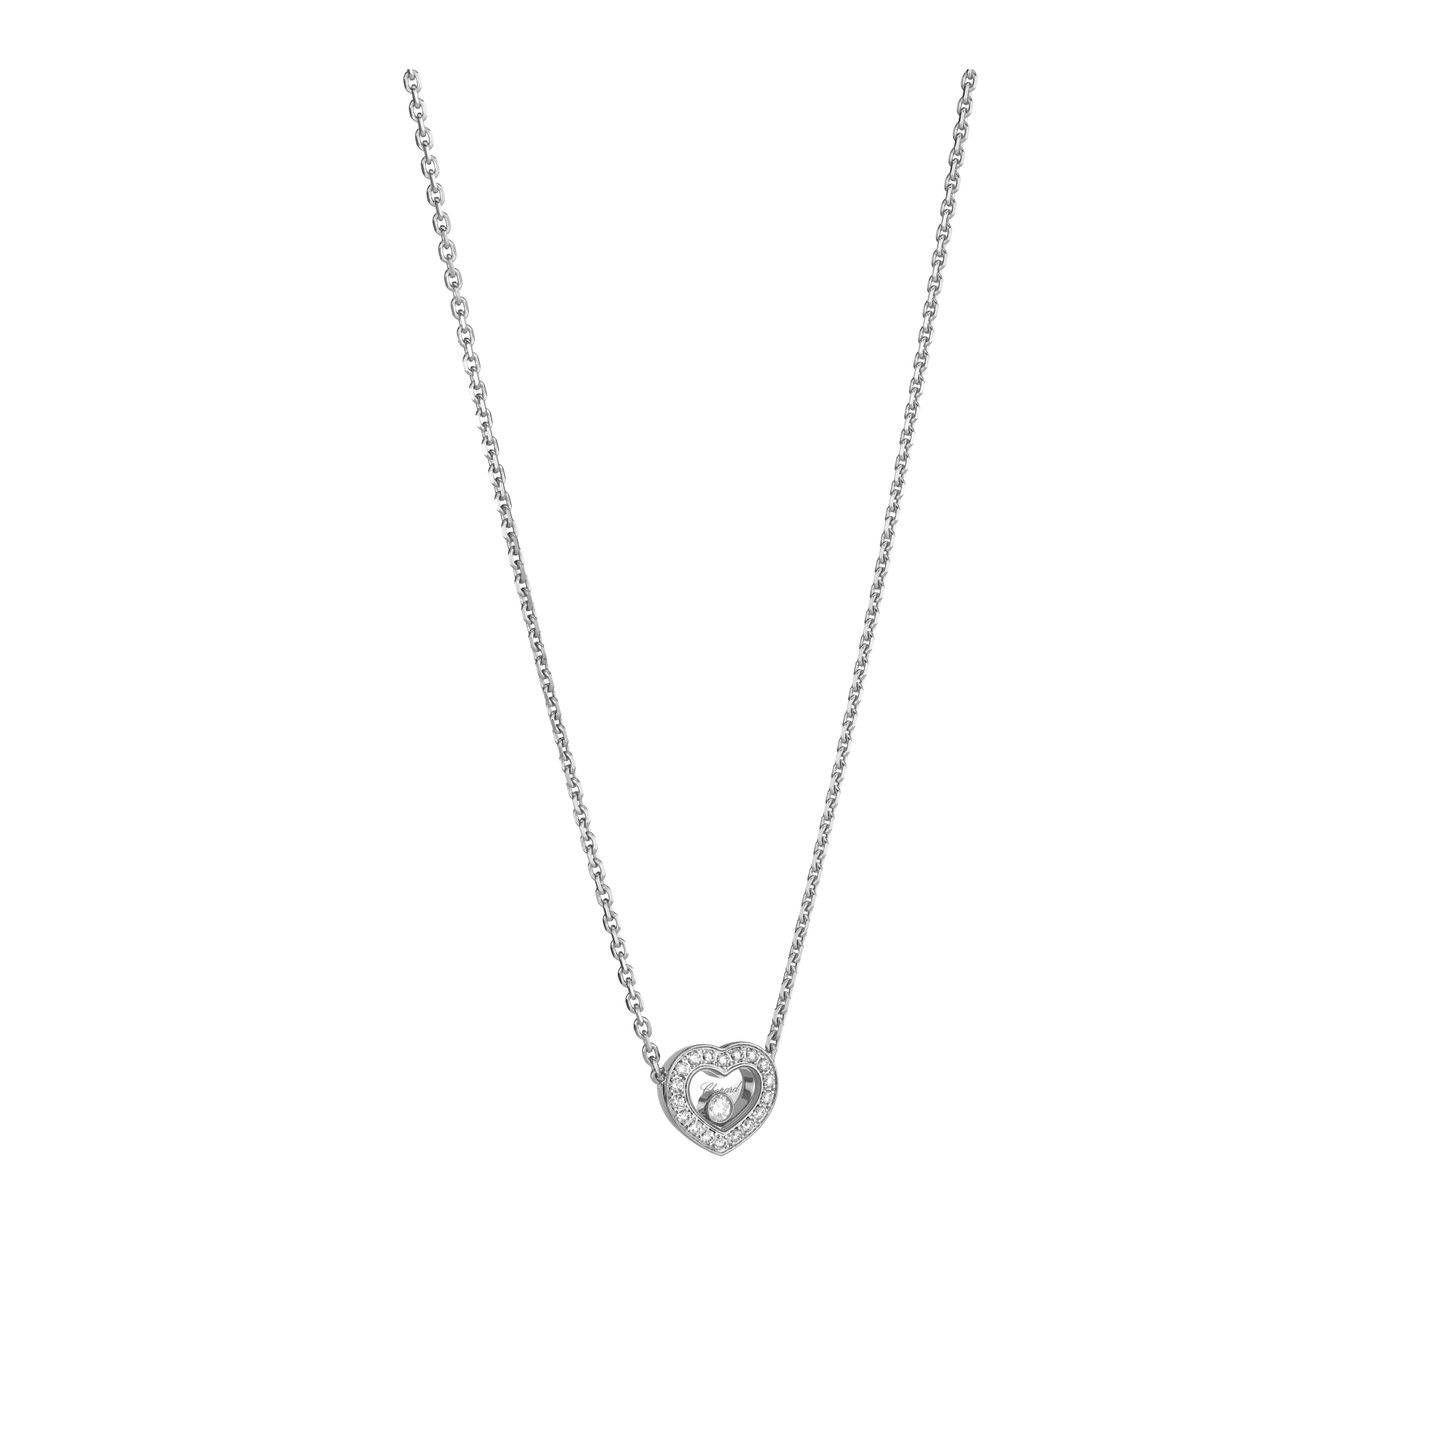 HAPPY DIAMONDS ICONS NECKLACE, ETHICAL WHITE GOLD, DIAMONDS 81A054-1201